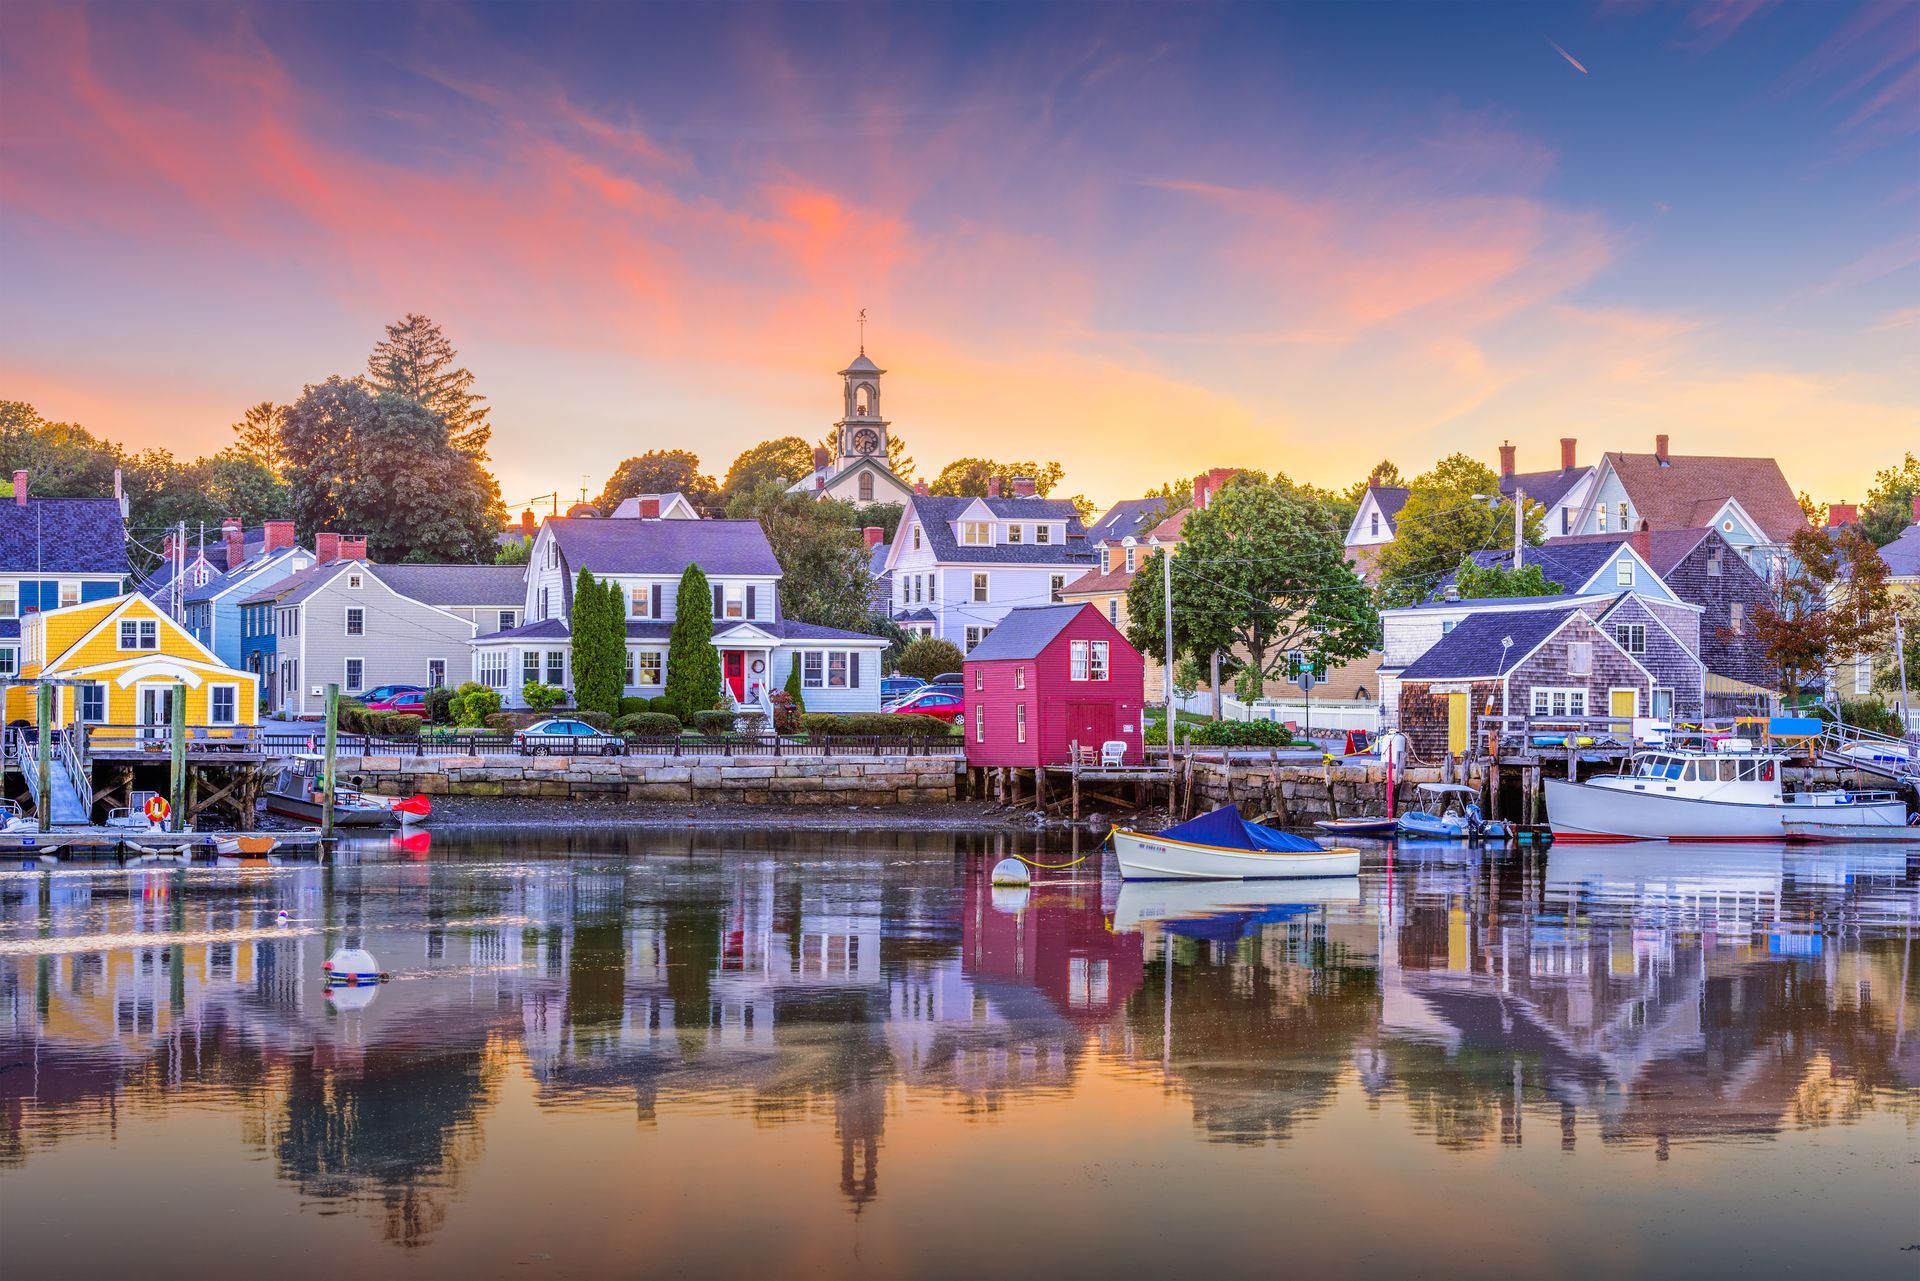 a small town on the shore of a body of water at sunset .